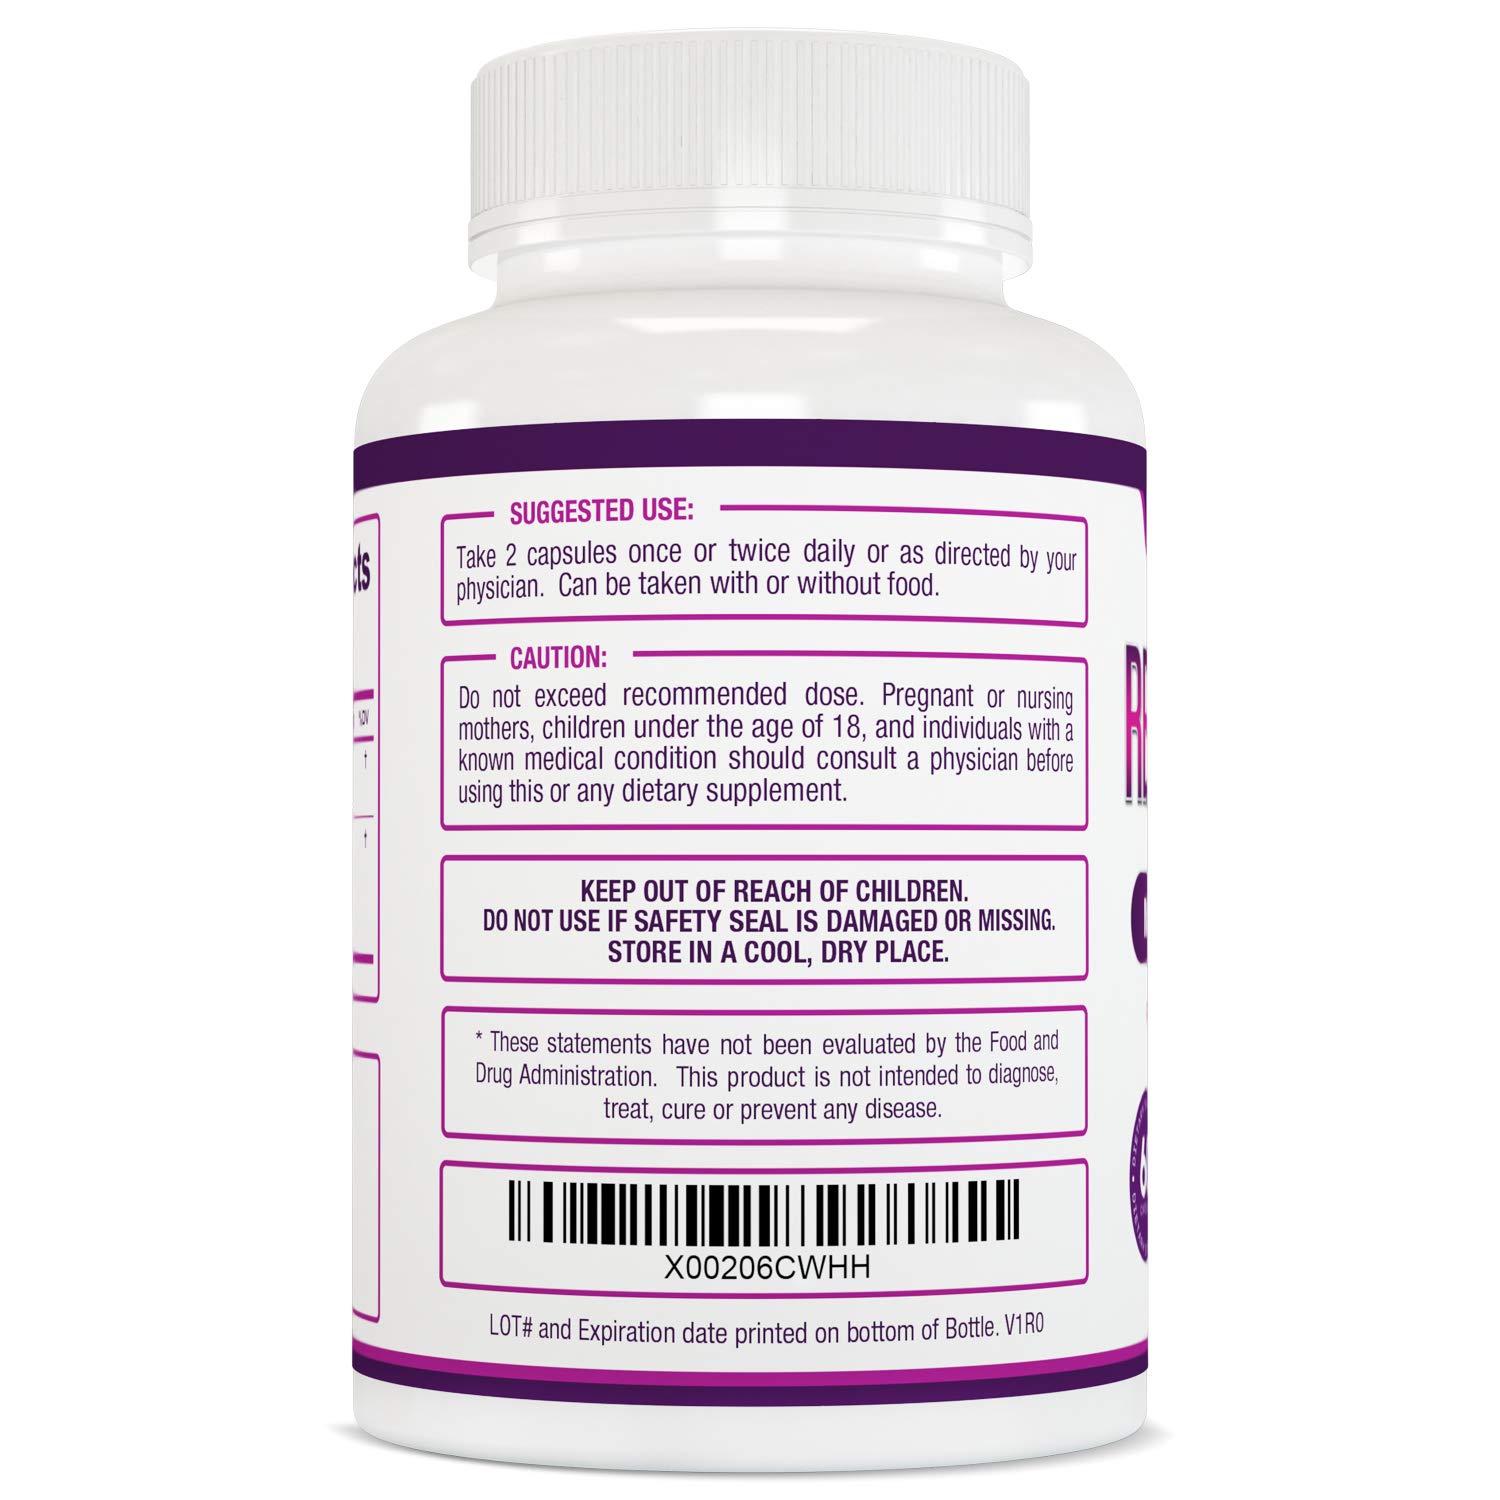 Purely Optimal Premium Resveratrol Supplement 1500mg - Max Strength, Trans Resveratrol Capsules - with Grape Seed & Green Tea Extract - 30 Days Supply